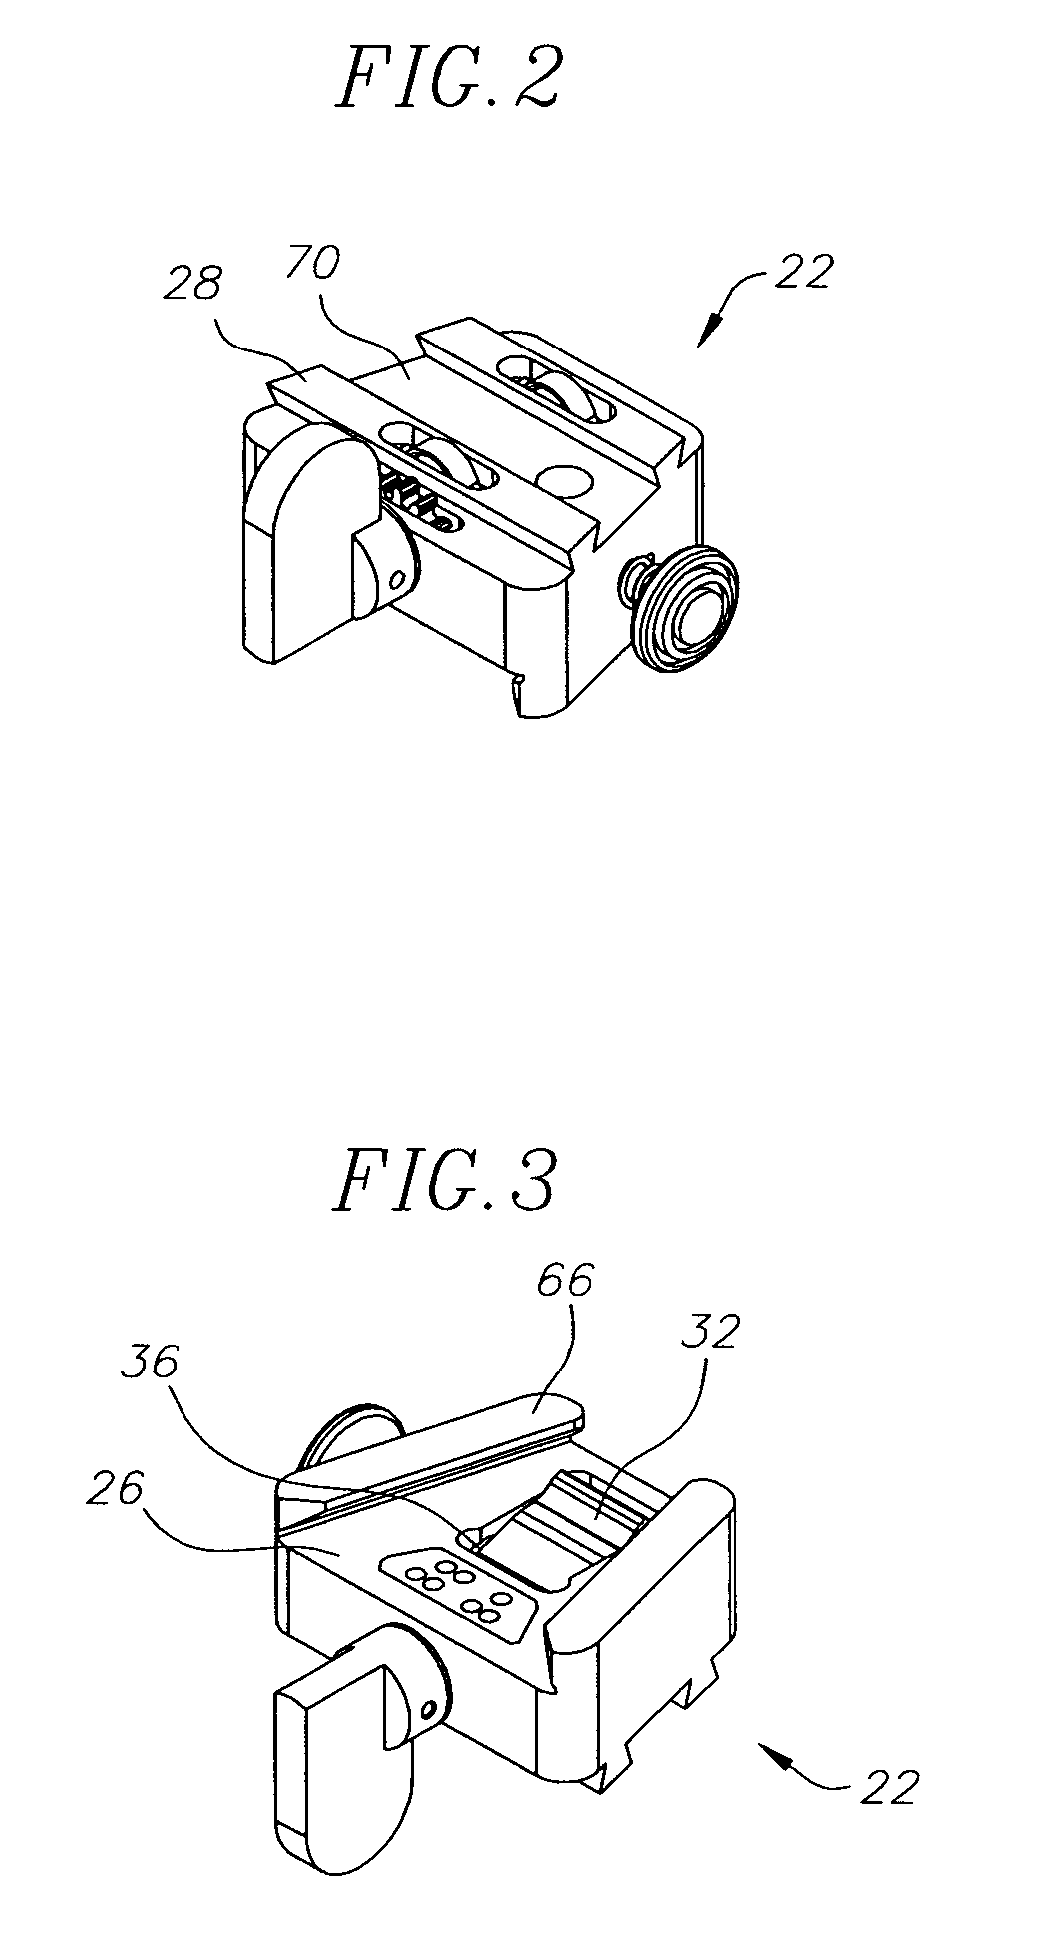 Monorail mount for enhanced night vision goggles